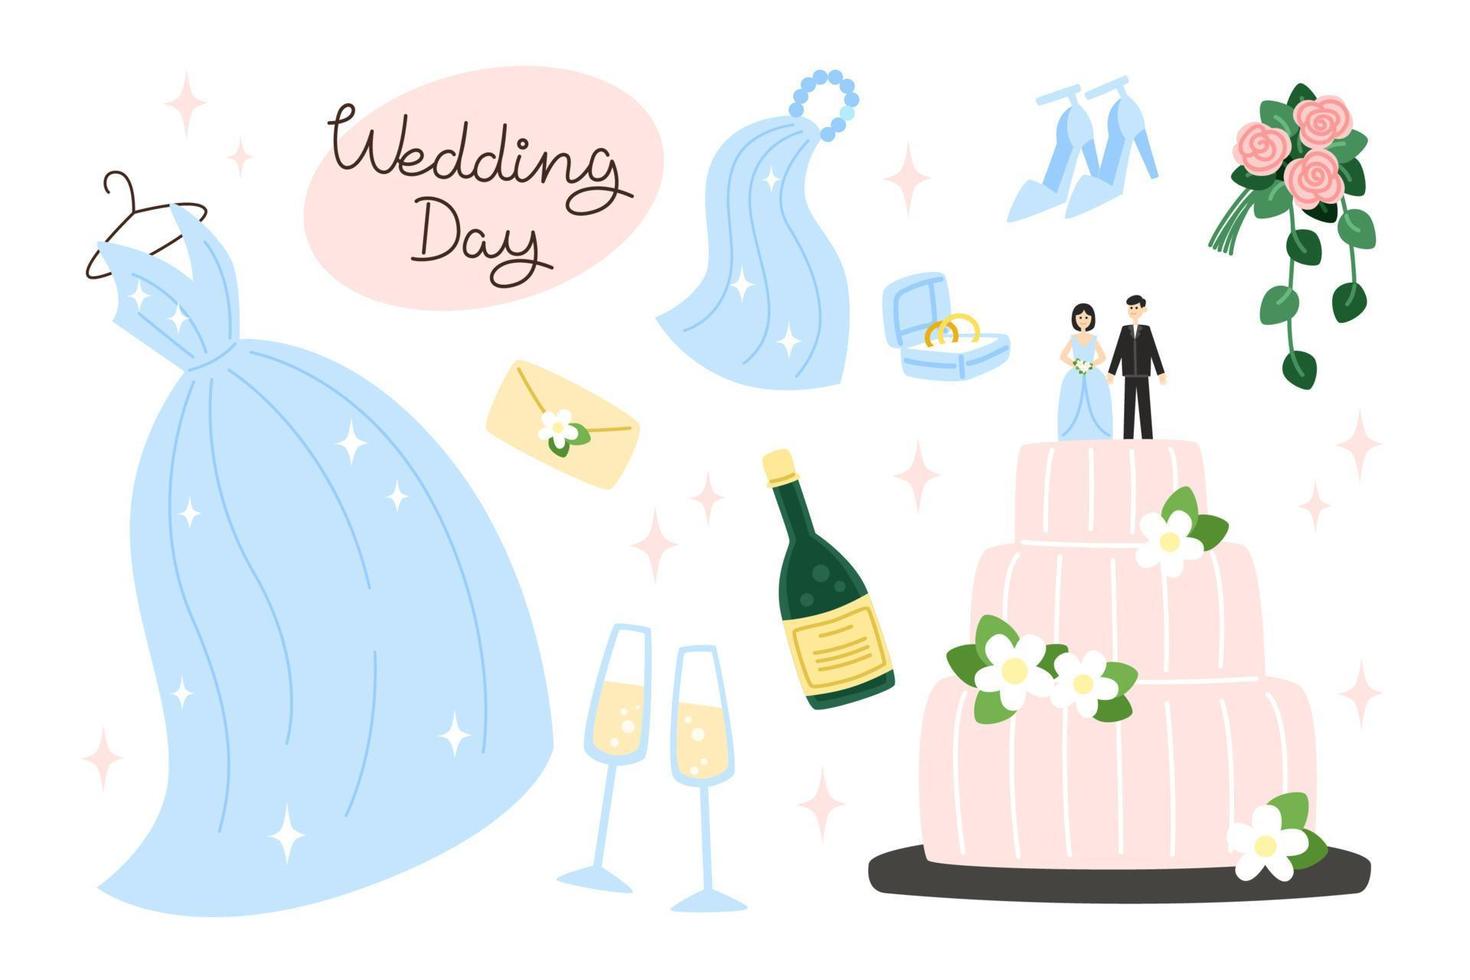 Set of elements for the wedding day, flat style illustration vector